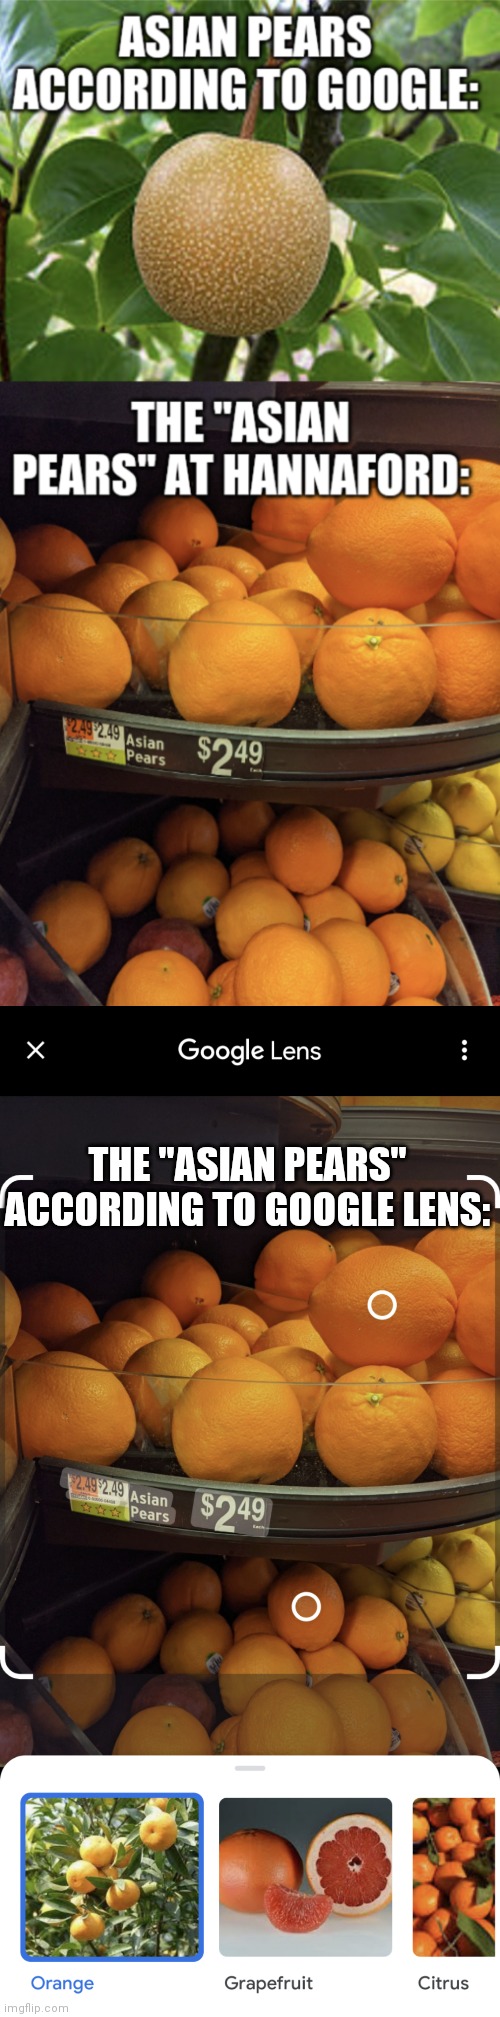 Asian Pears | THE "ASIAN PEARS" ACCORDING TO GOOGLE LENS: | image tagged in asian pears,google,google lens,hannaford | made w/ Imgflip meme maker